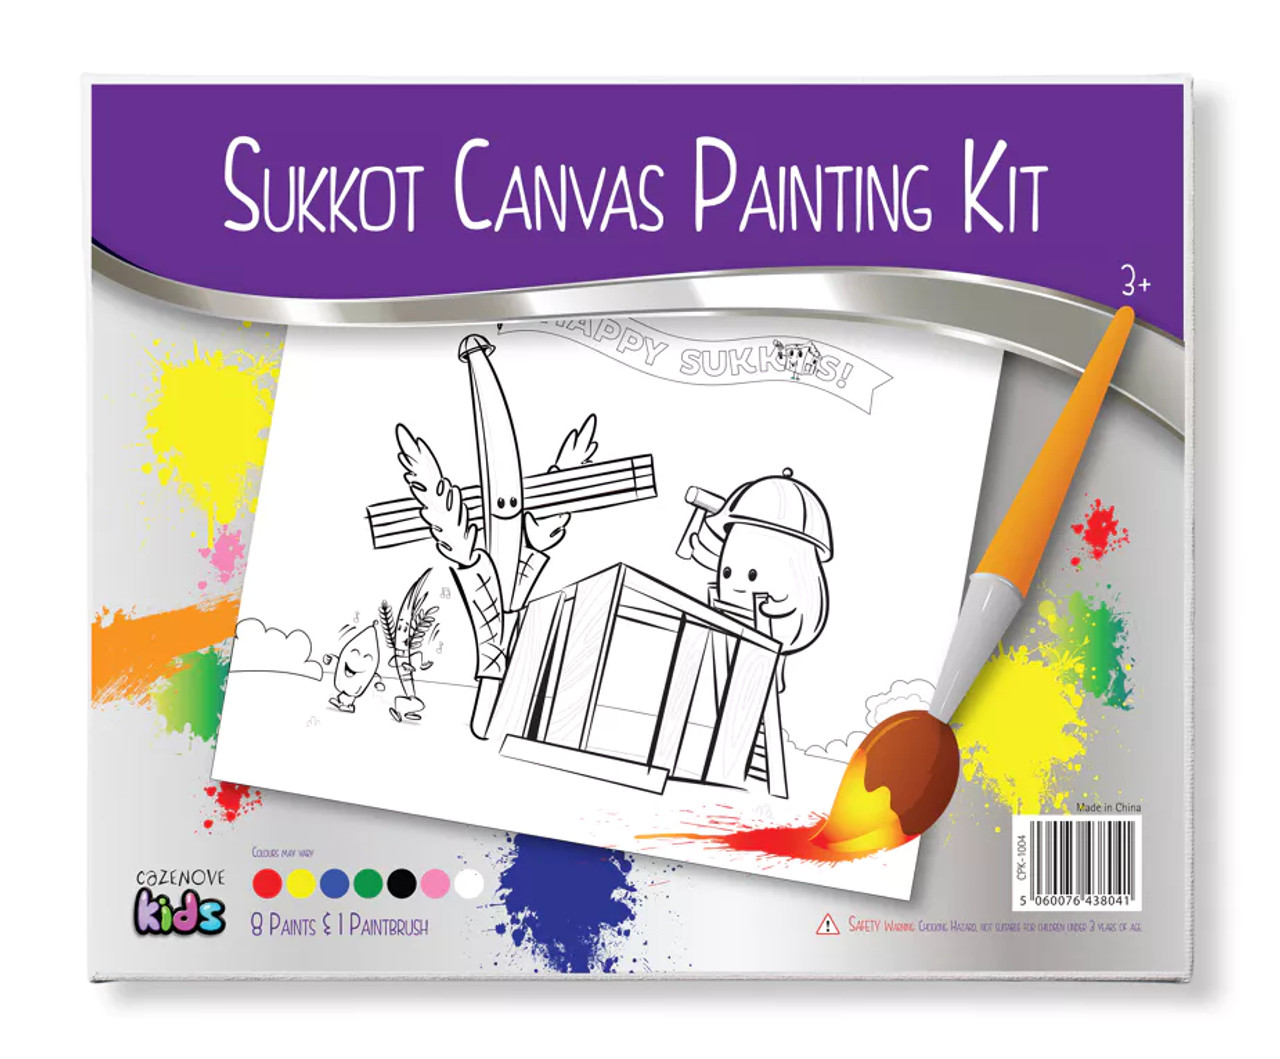 Simchas Torah Canvas Painting Kit - As low as $4.59 - New